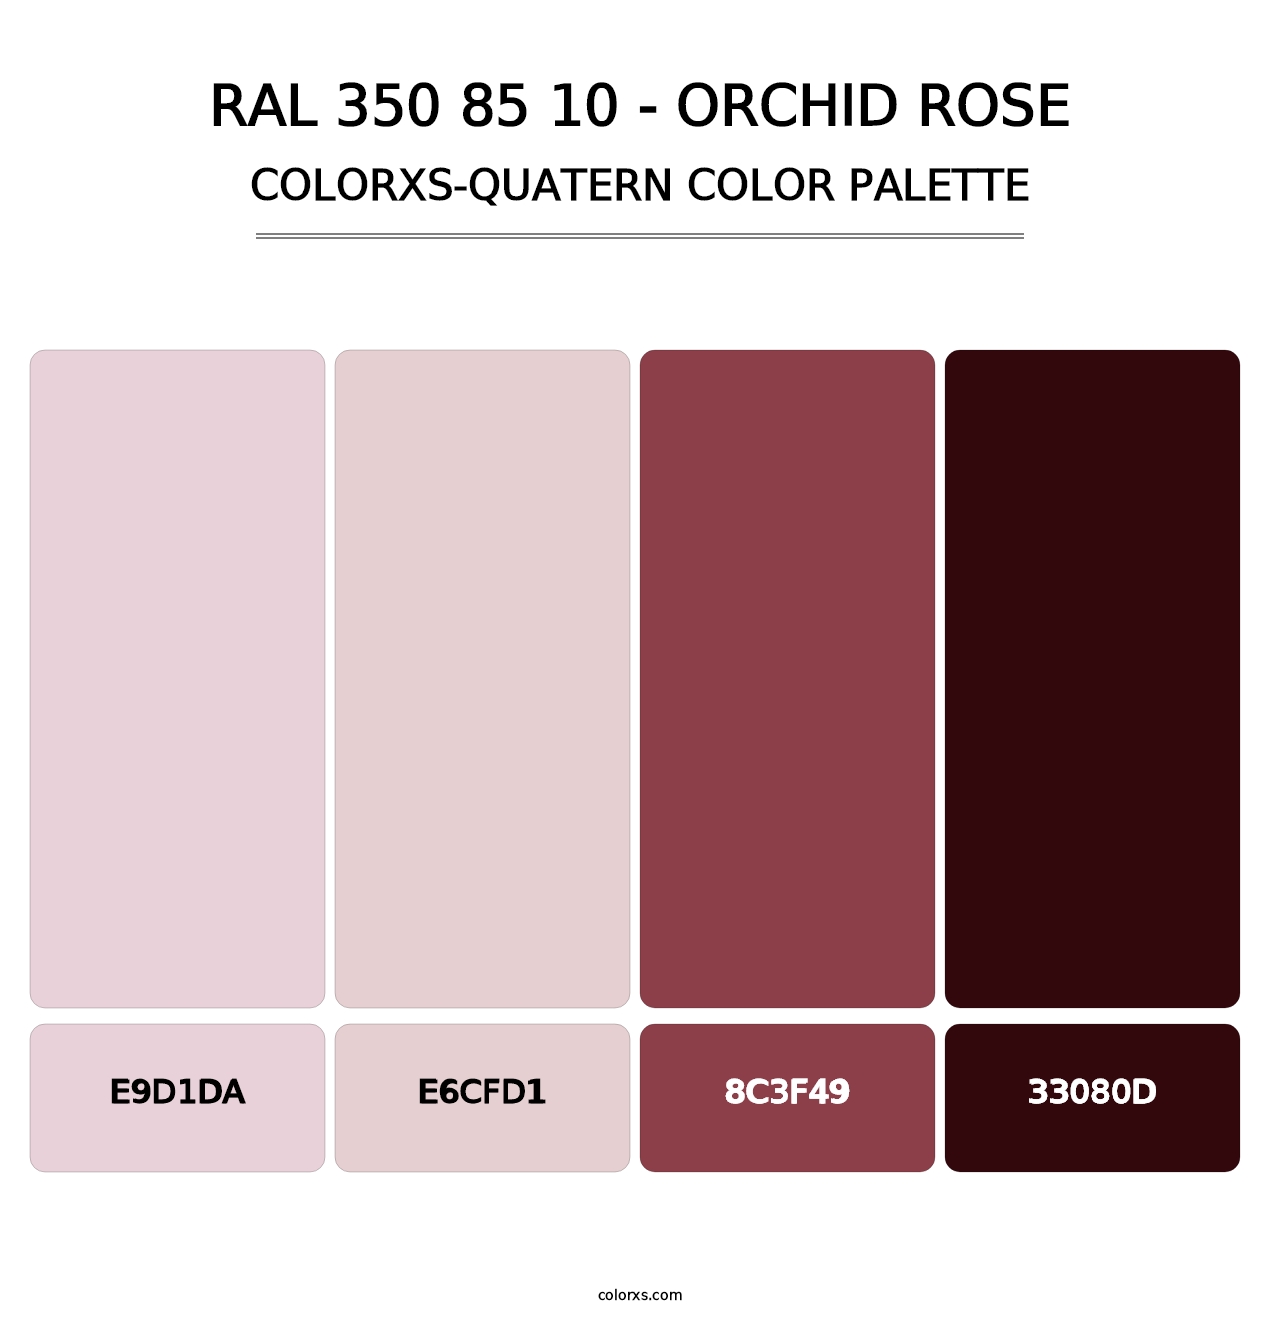 RAL 350 85 10 - Orchid Rose - Colorxs Quatern Palette